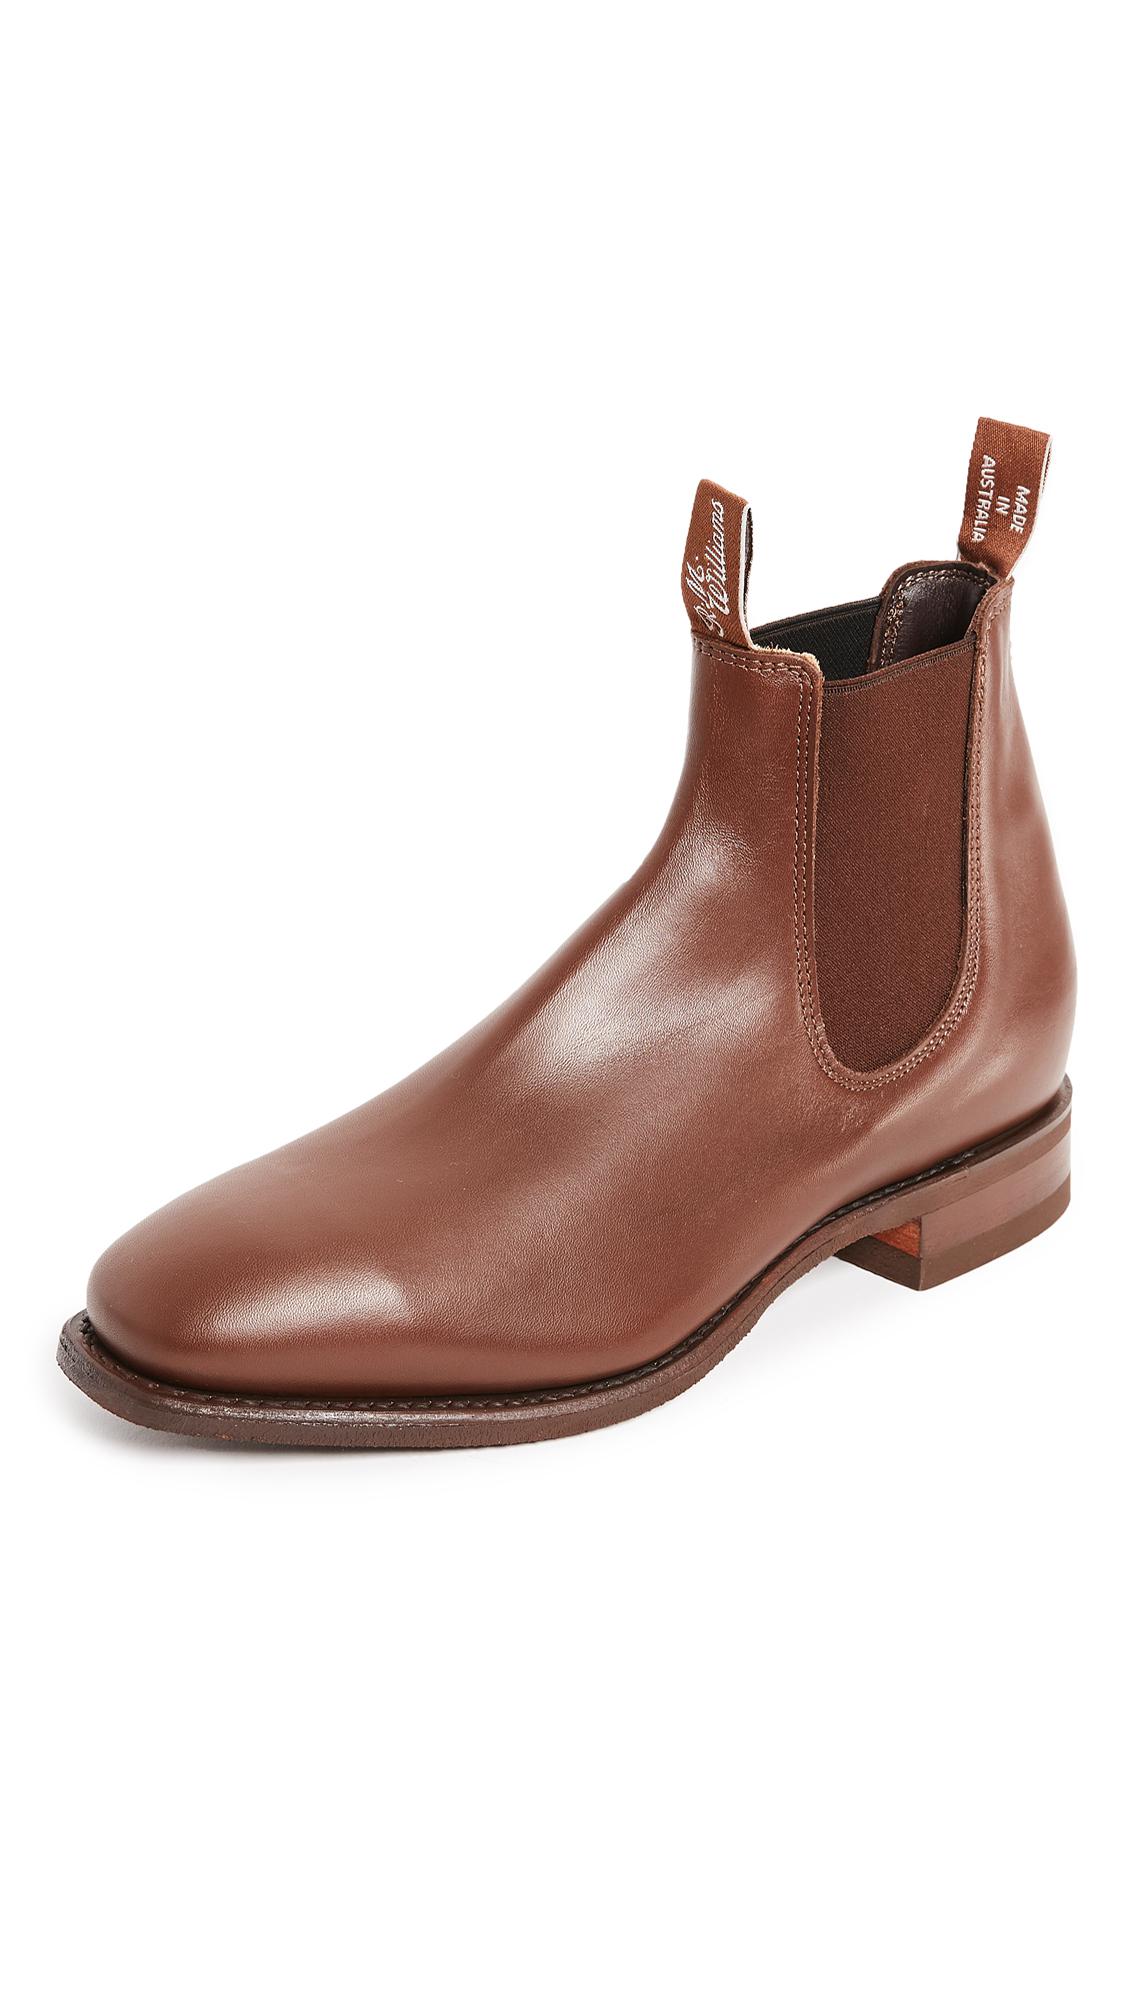 R.M. Williams Comfort Rm Leather Chelsea Boots in Dark Tan (Brown) for ...